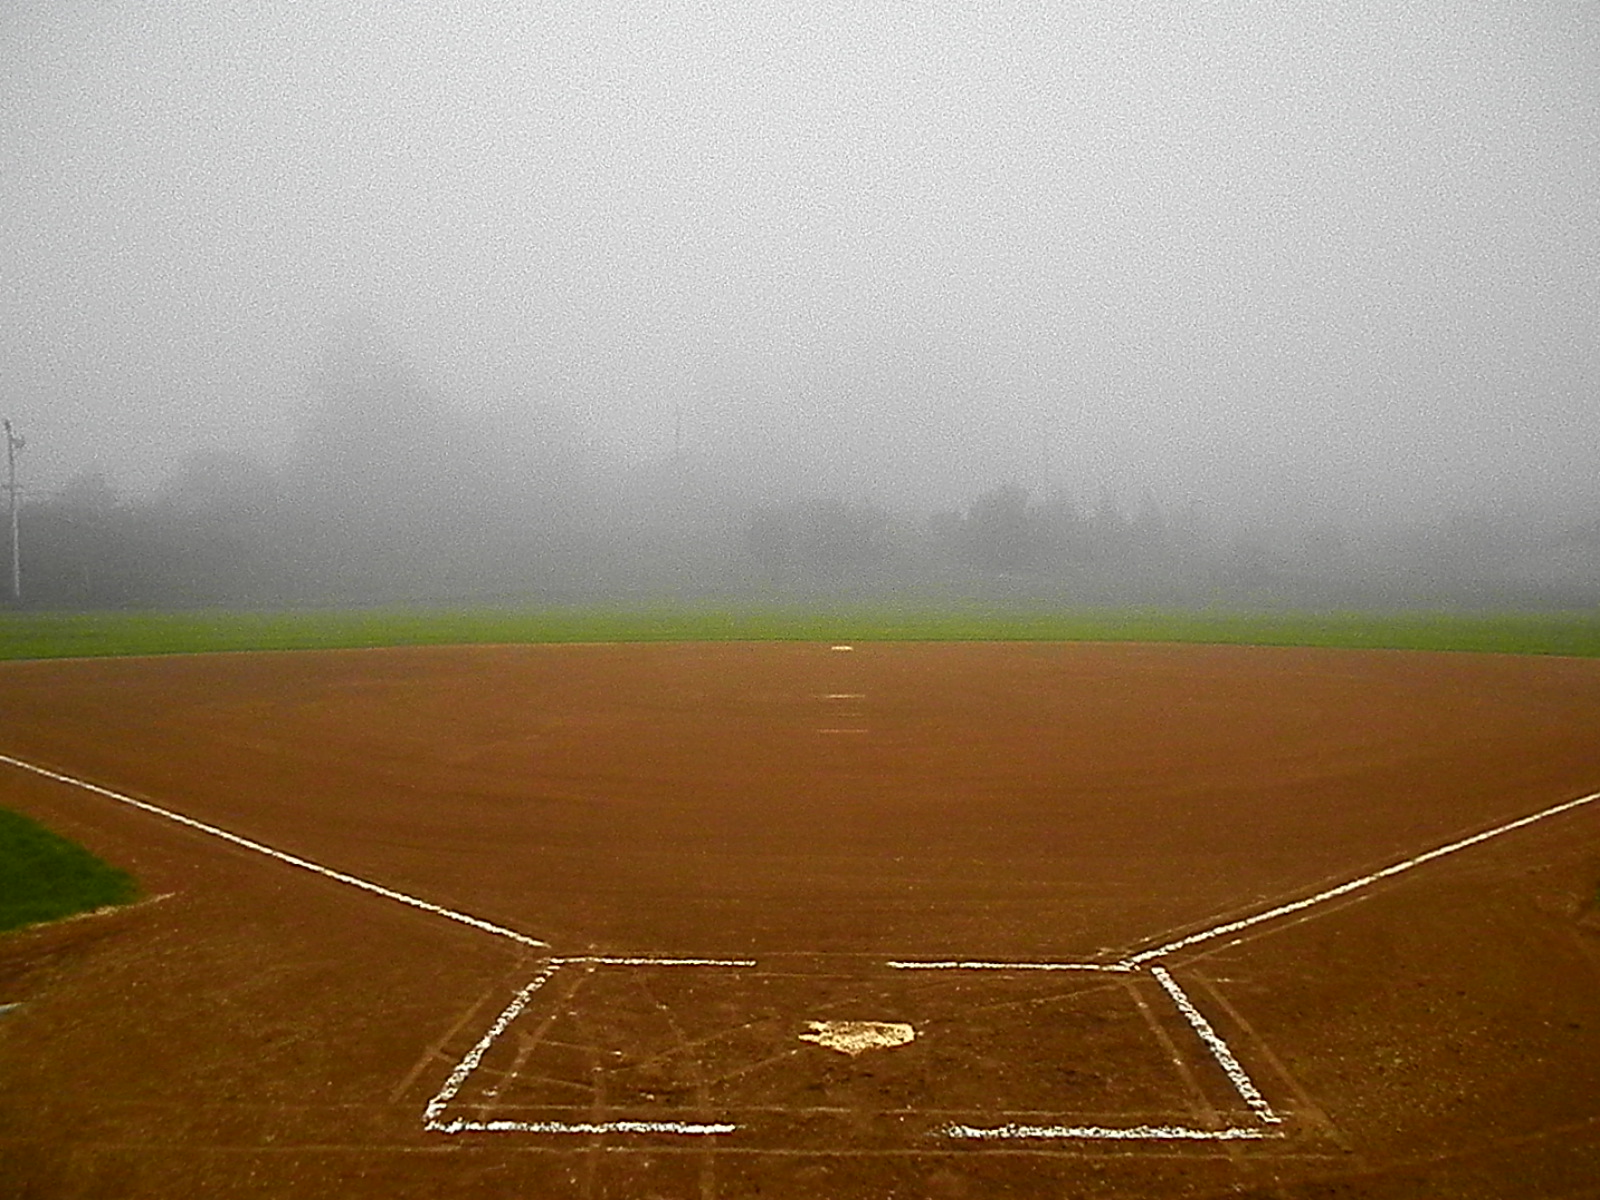 Cool Softball Field Background Wanted To Play